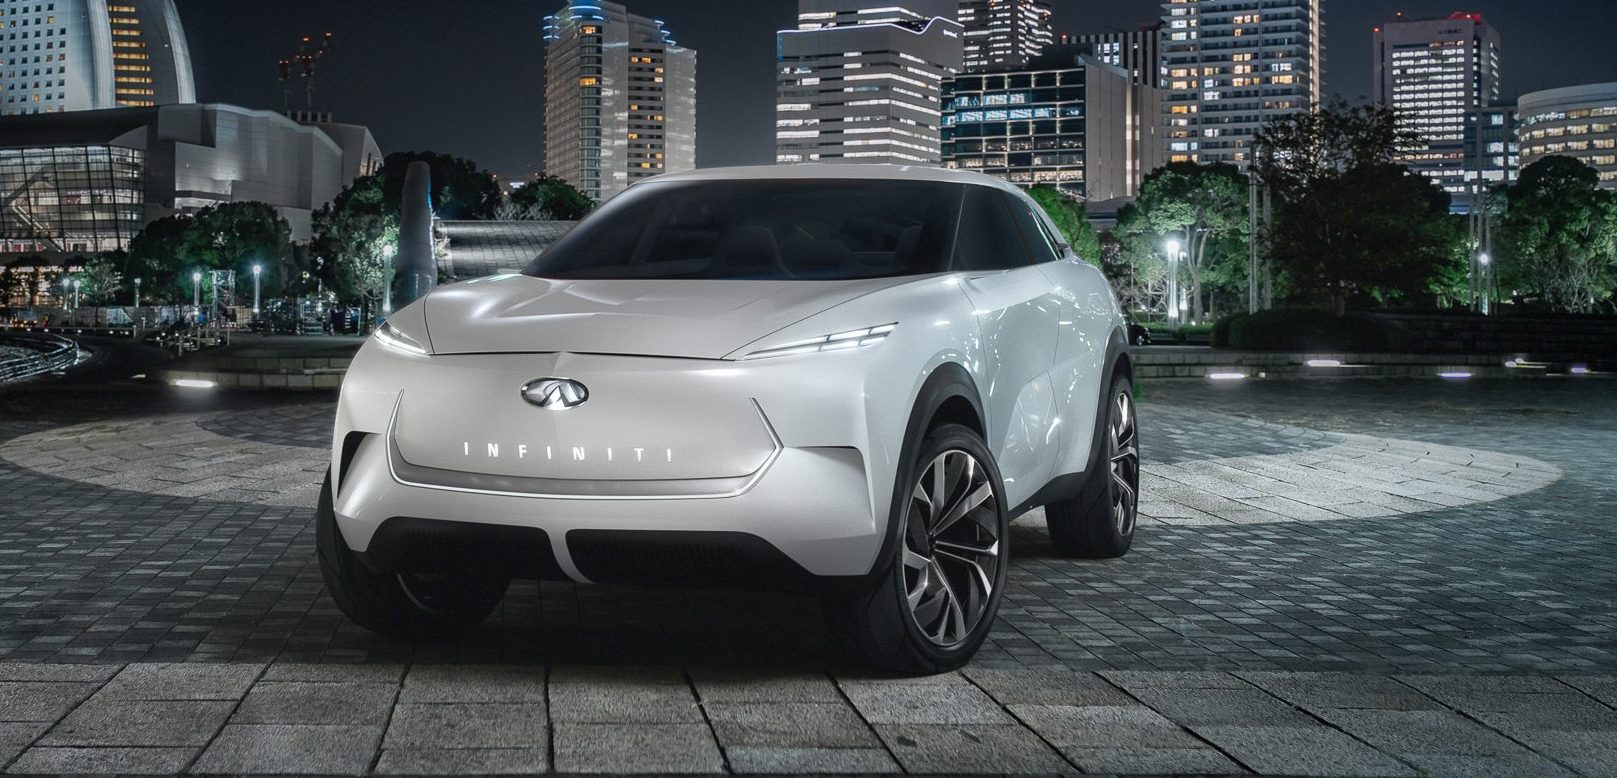 INFINITI unveils the design of its first allelectric SUV ahead of